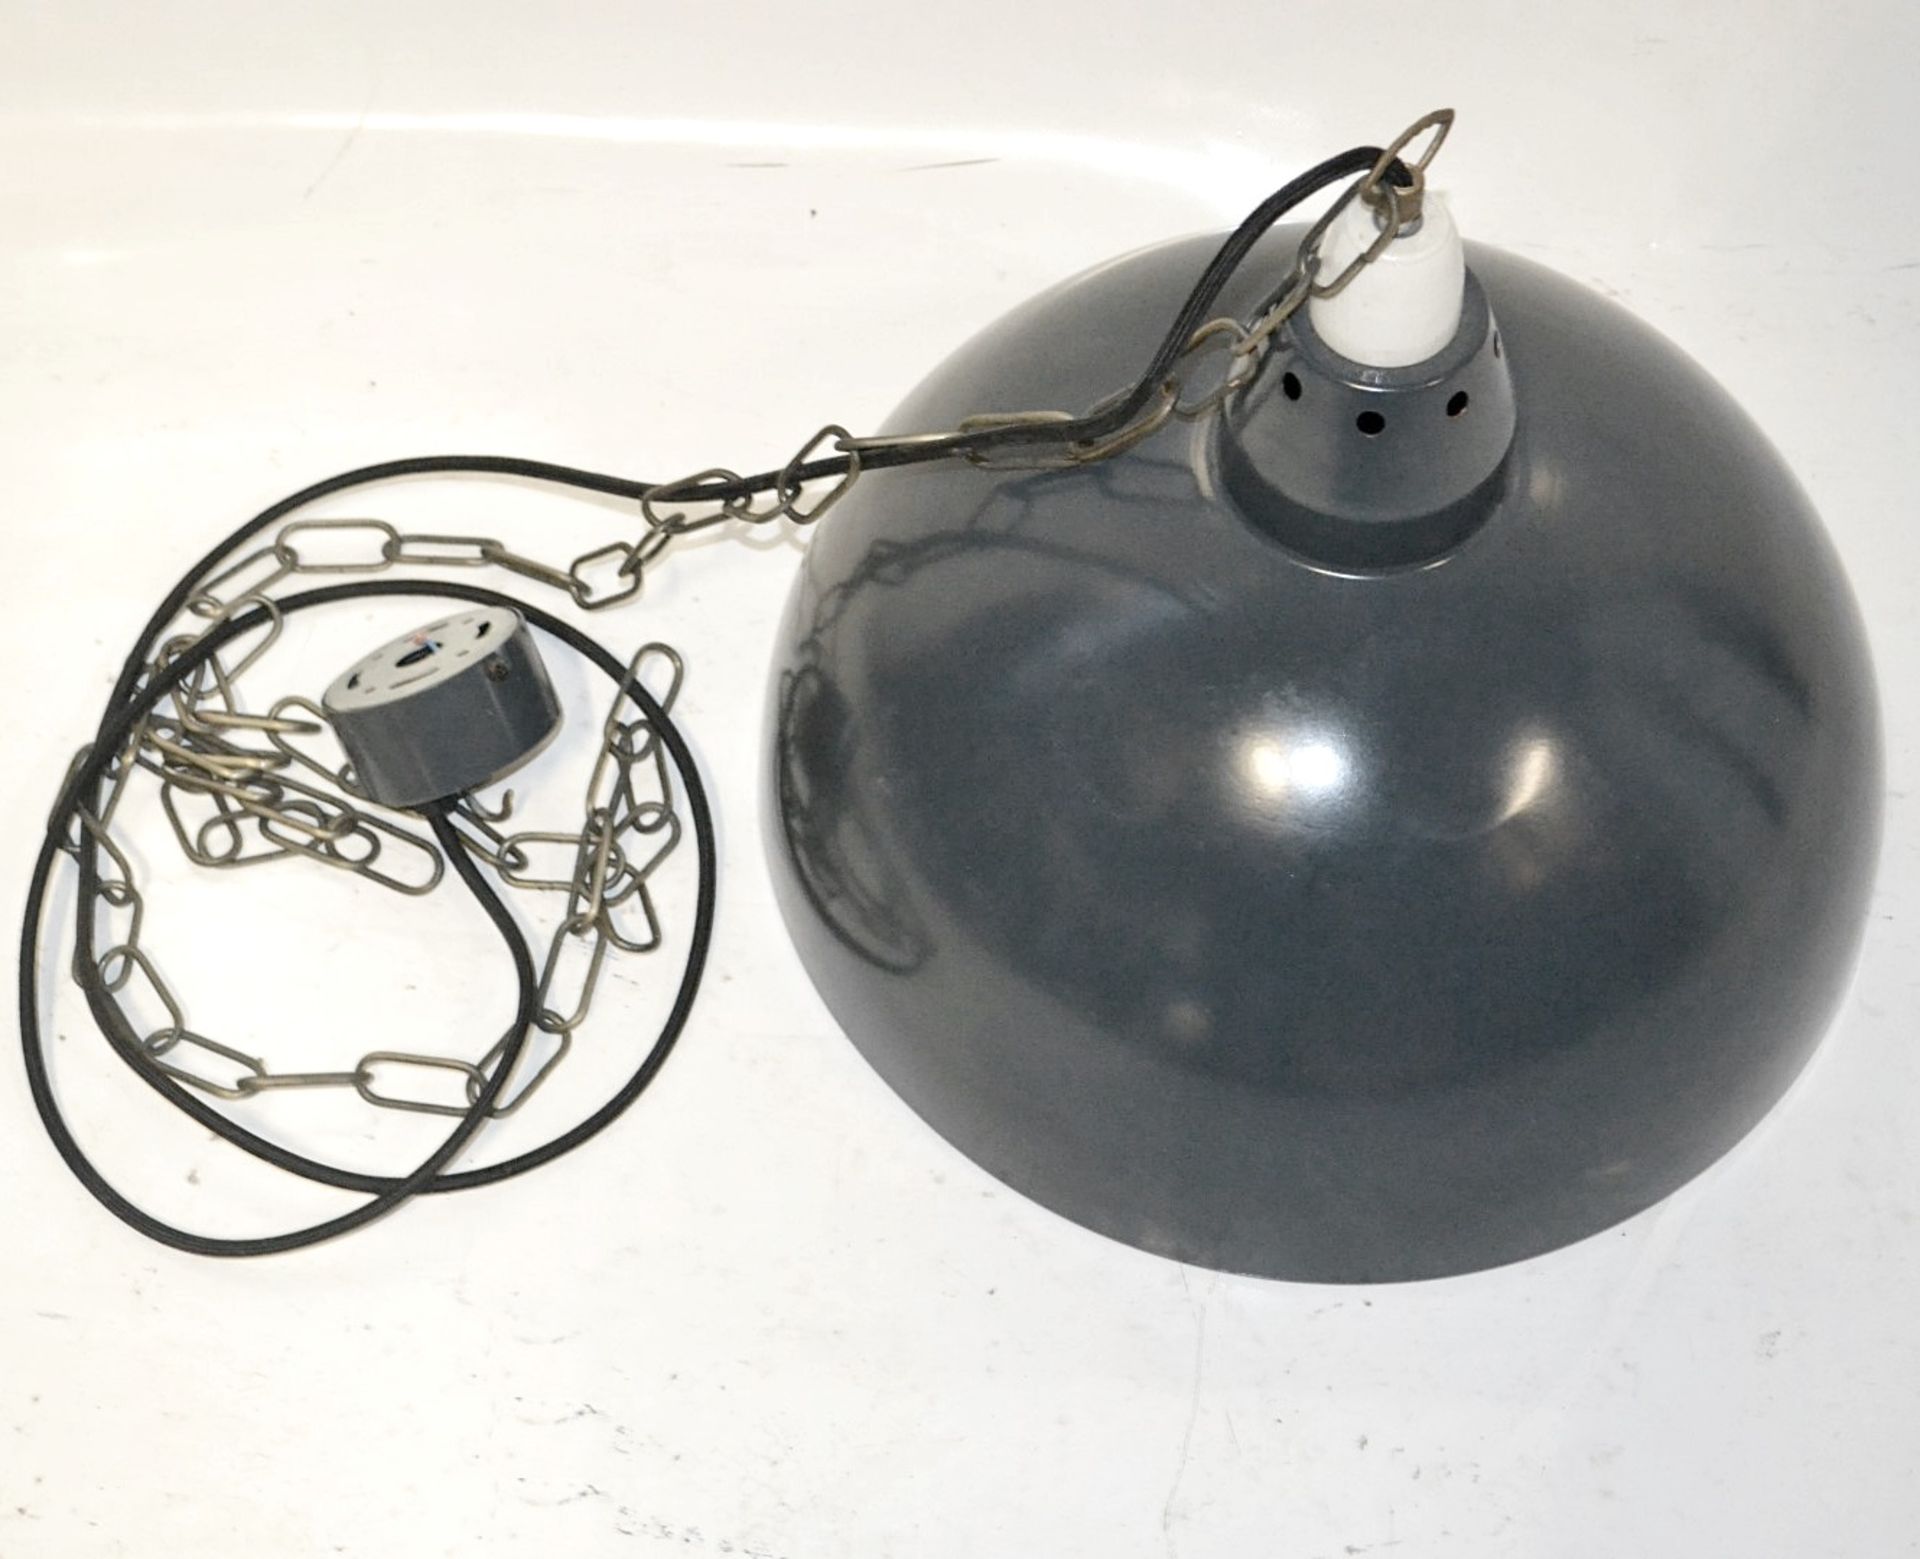 5 x Dome Pendant Ceiling Light Fittings With Chain And Black Fabric Flex - CL353 - Image 4 of 6